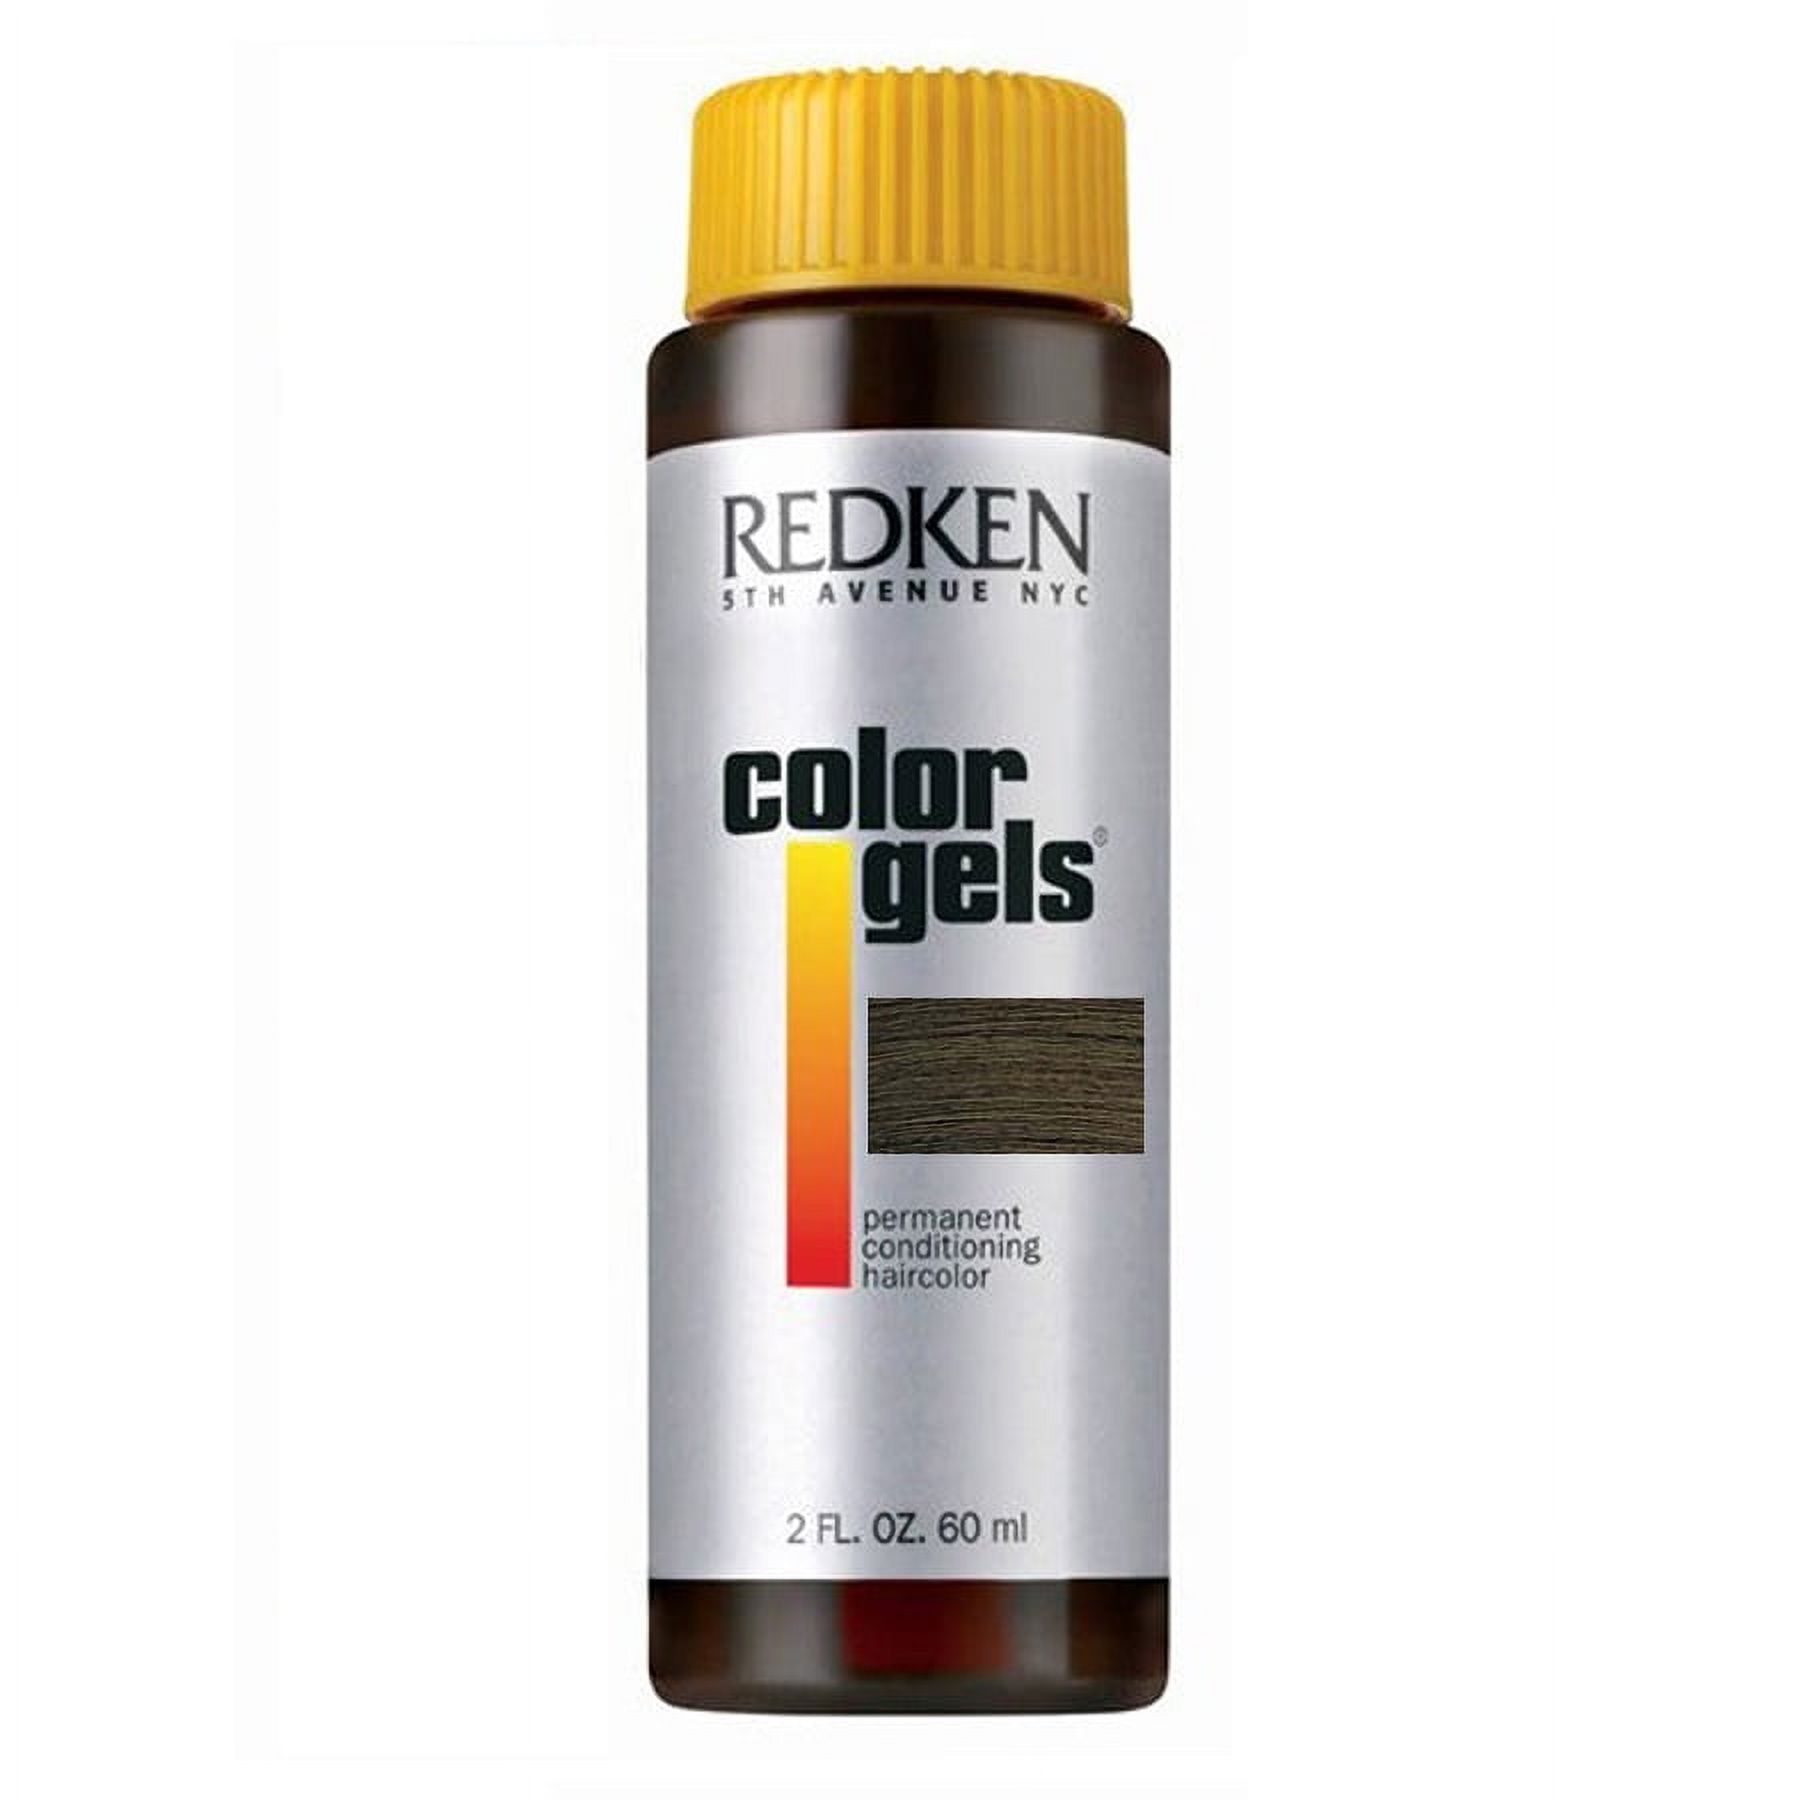 Redken Color Gels Permanent Conditioning Haircolor - Color : 8GN-Ivy - image 1 of 1